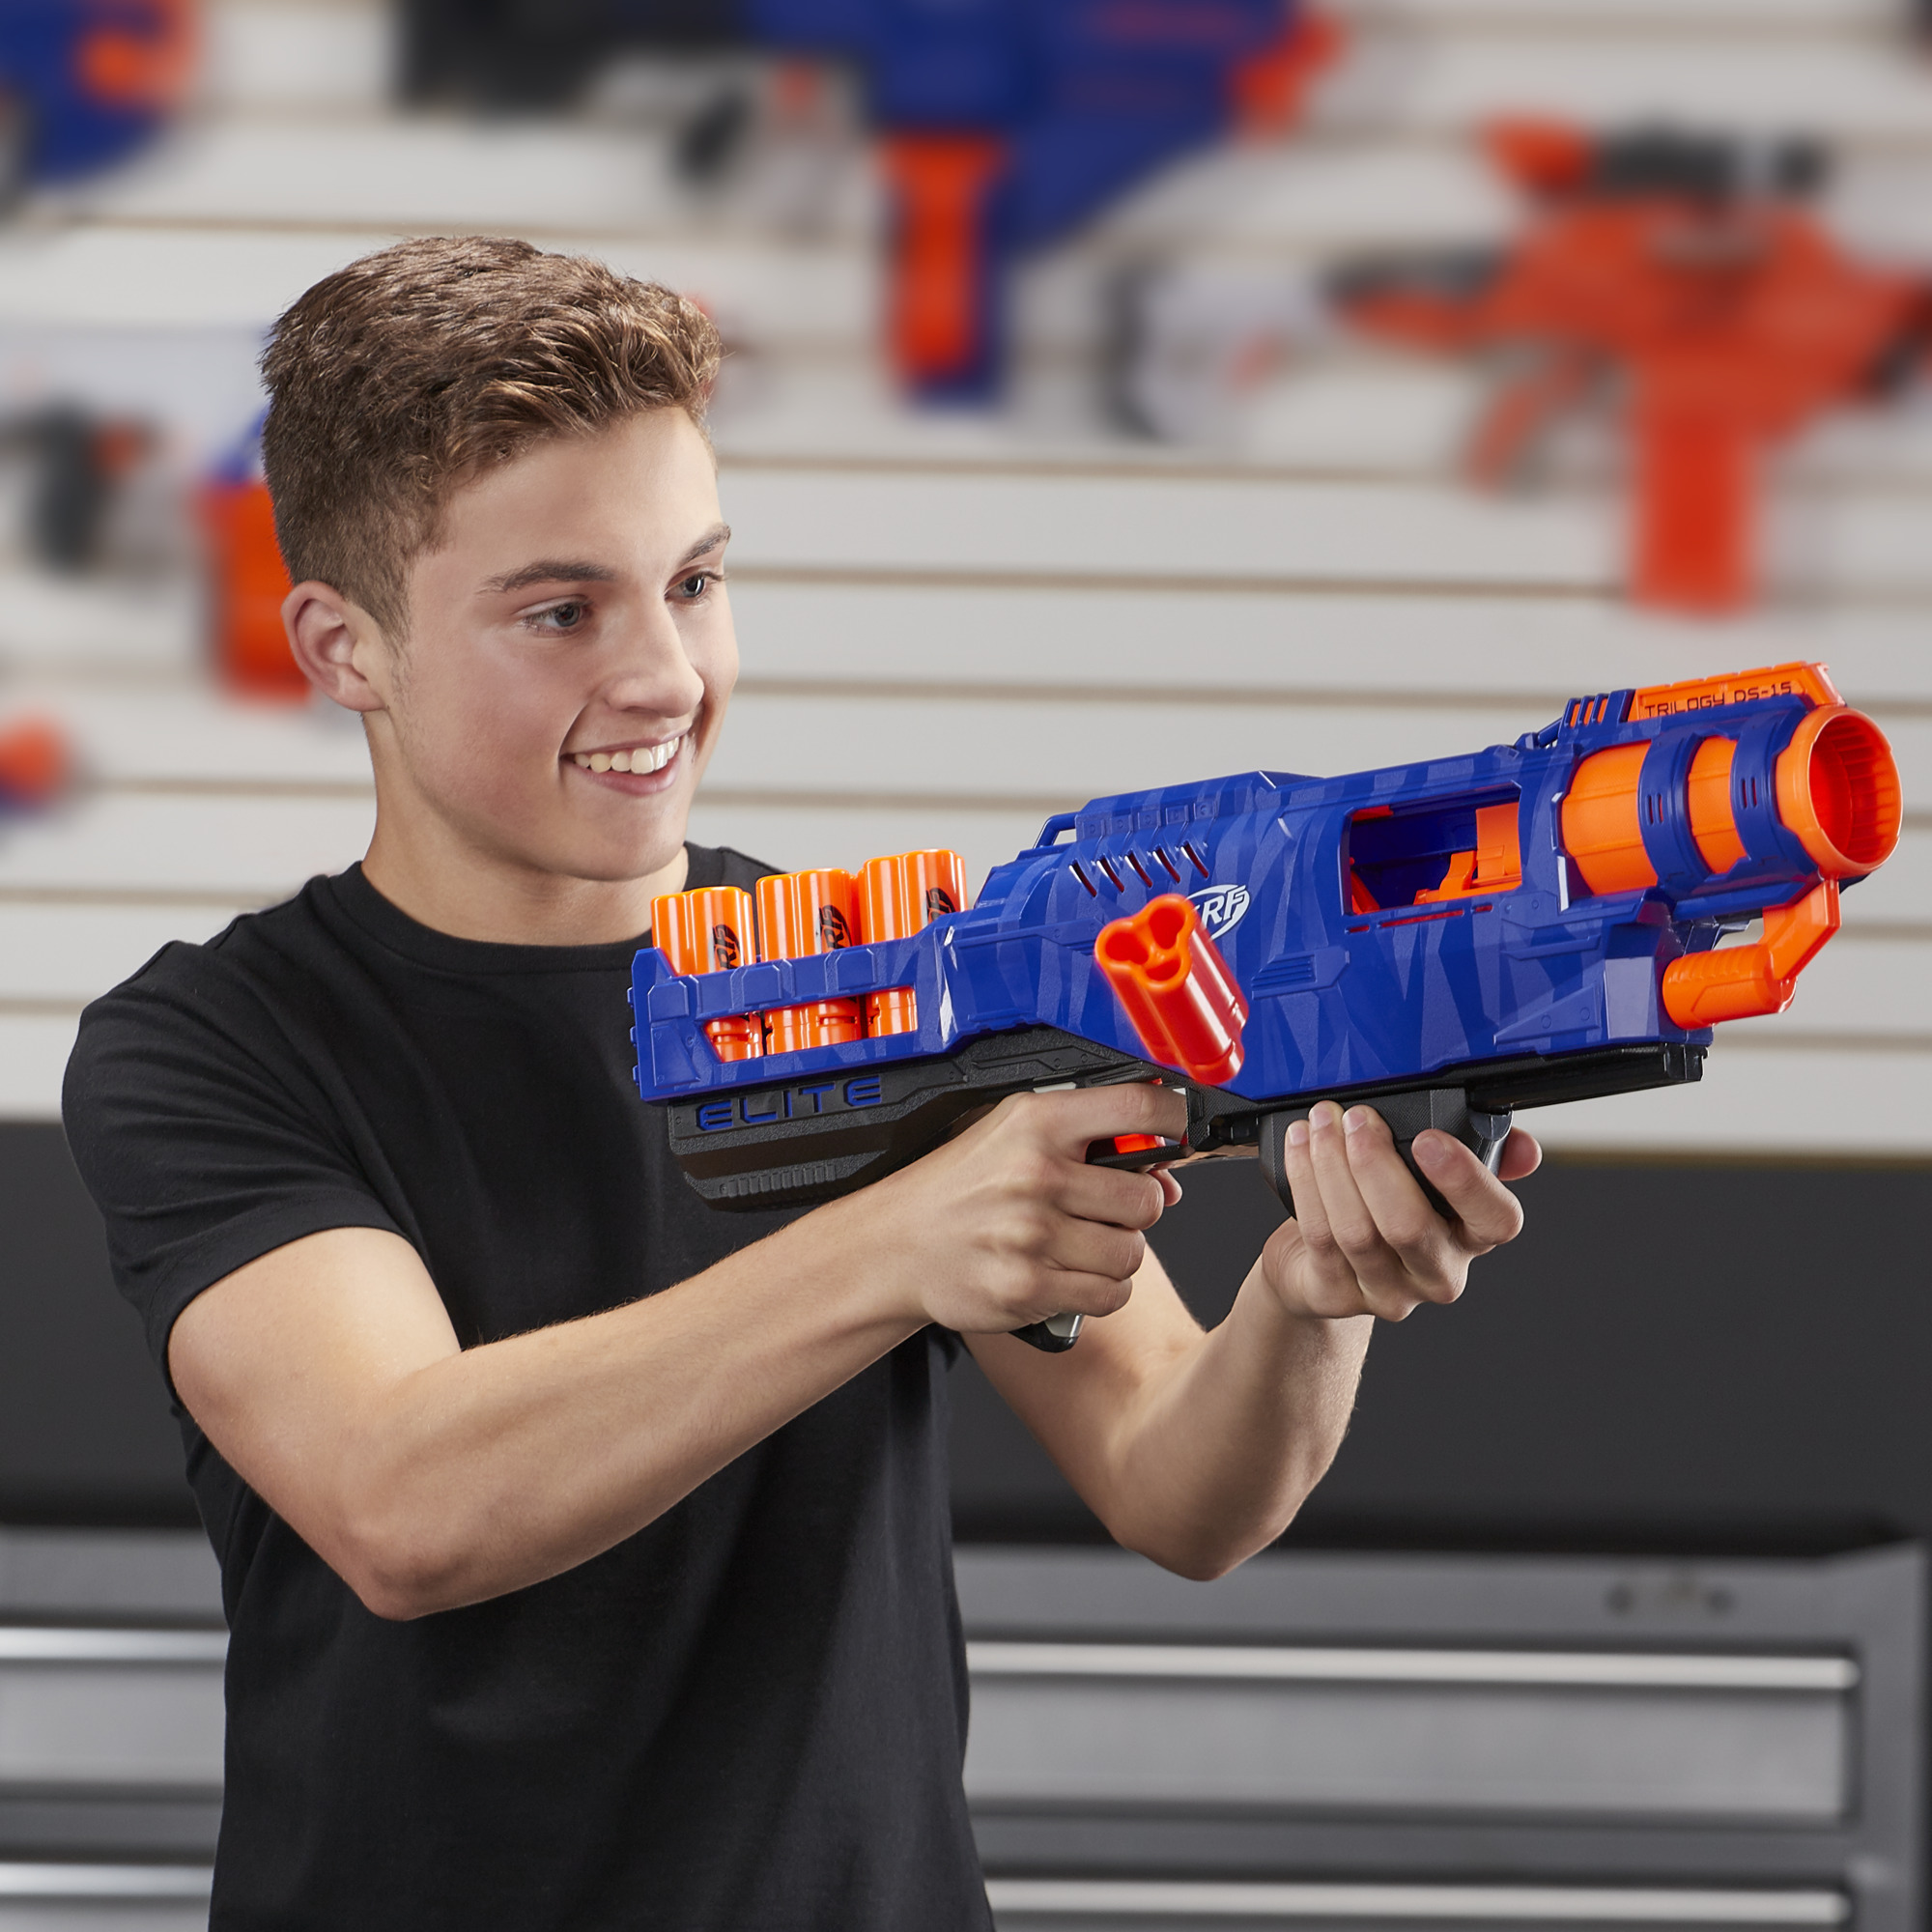 Trilogy DS-15 Nerf N-Strike Elite Toy Blaster with 15 Official Nerf Elite Darts and 5 Shells – For Kids, Teens, Adults - image 5 of 11